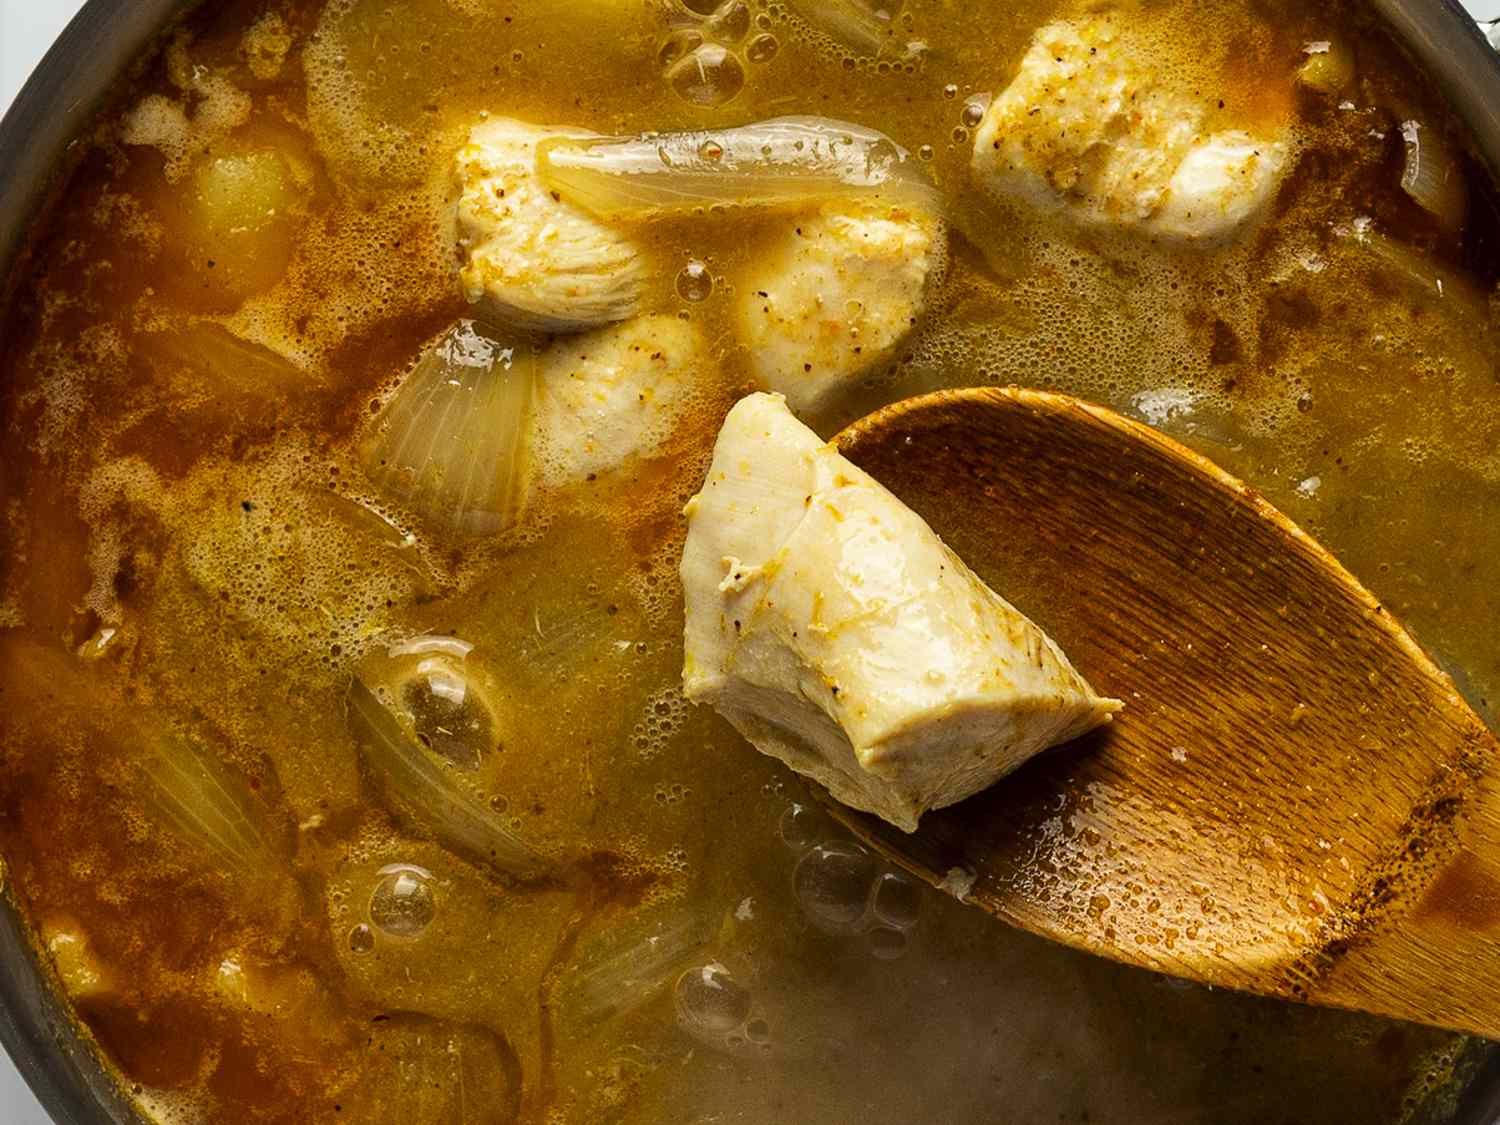 A close-up shot of the contents of the saucepan after the chicken has been added. A wooden spoon is lifting a piece of chicken out of the pan to demonstrate its cooked color and texture.